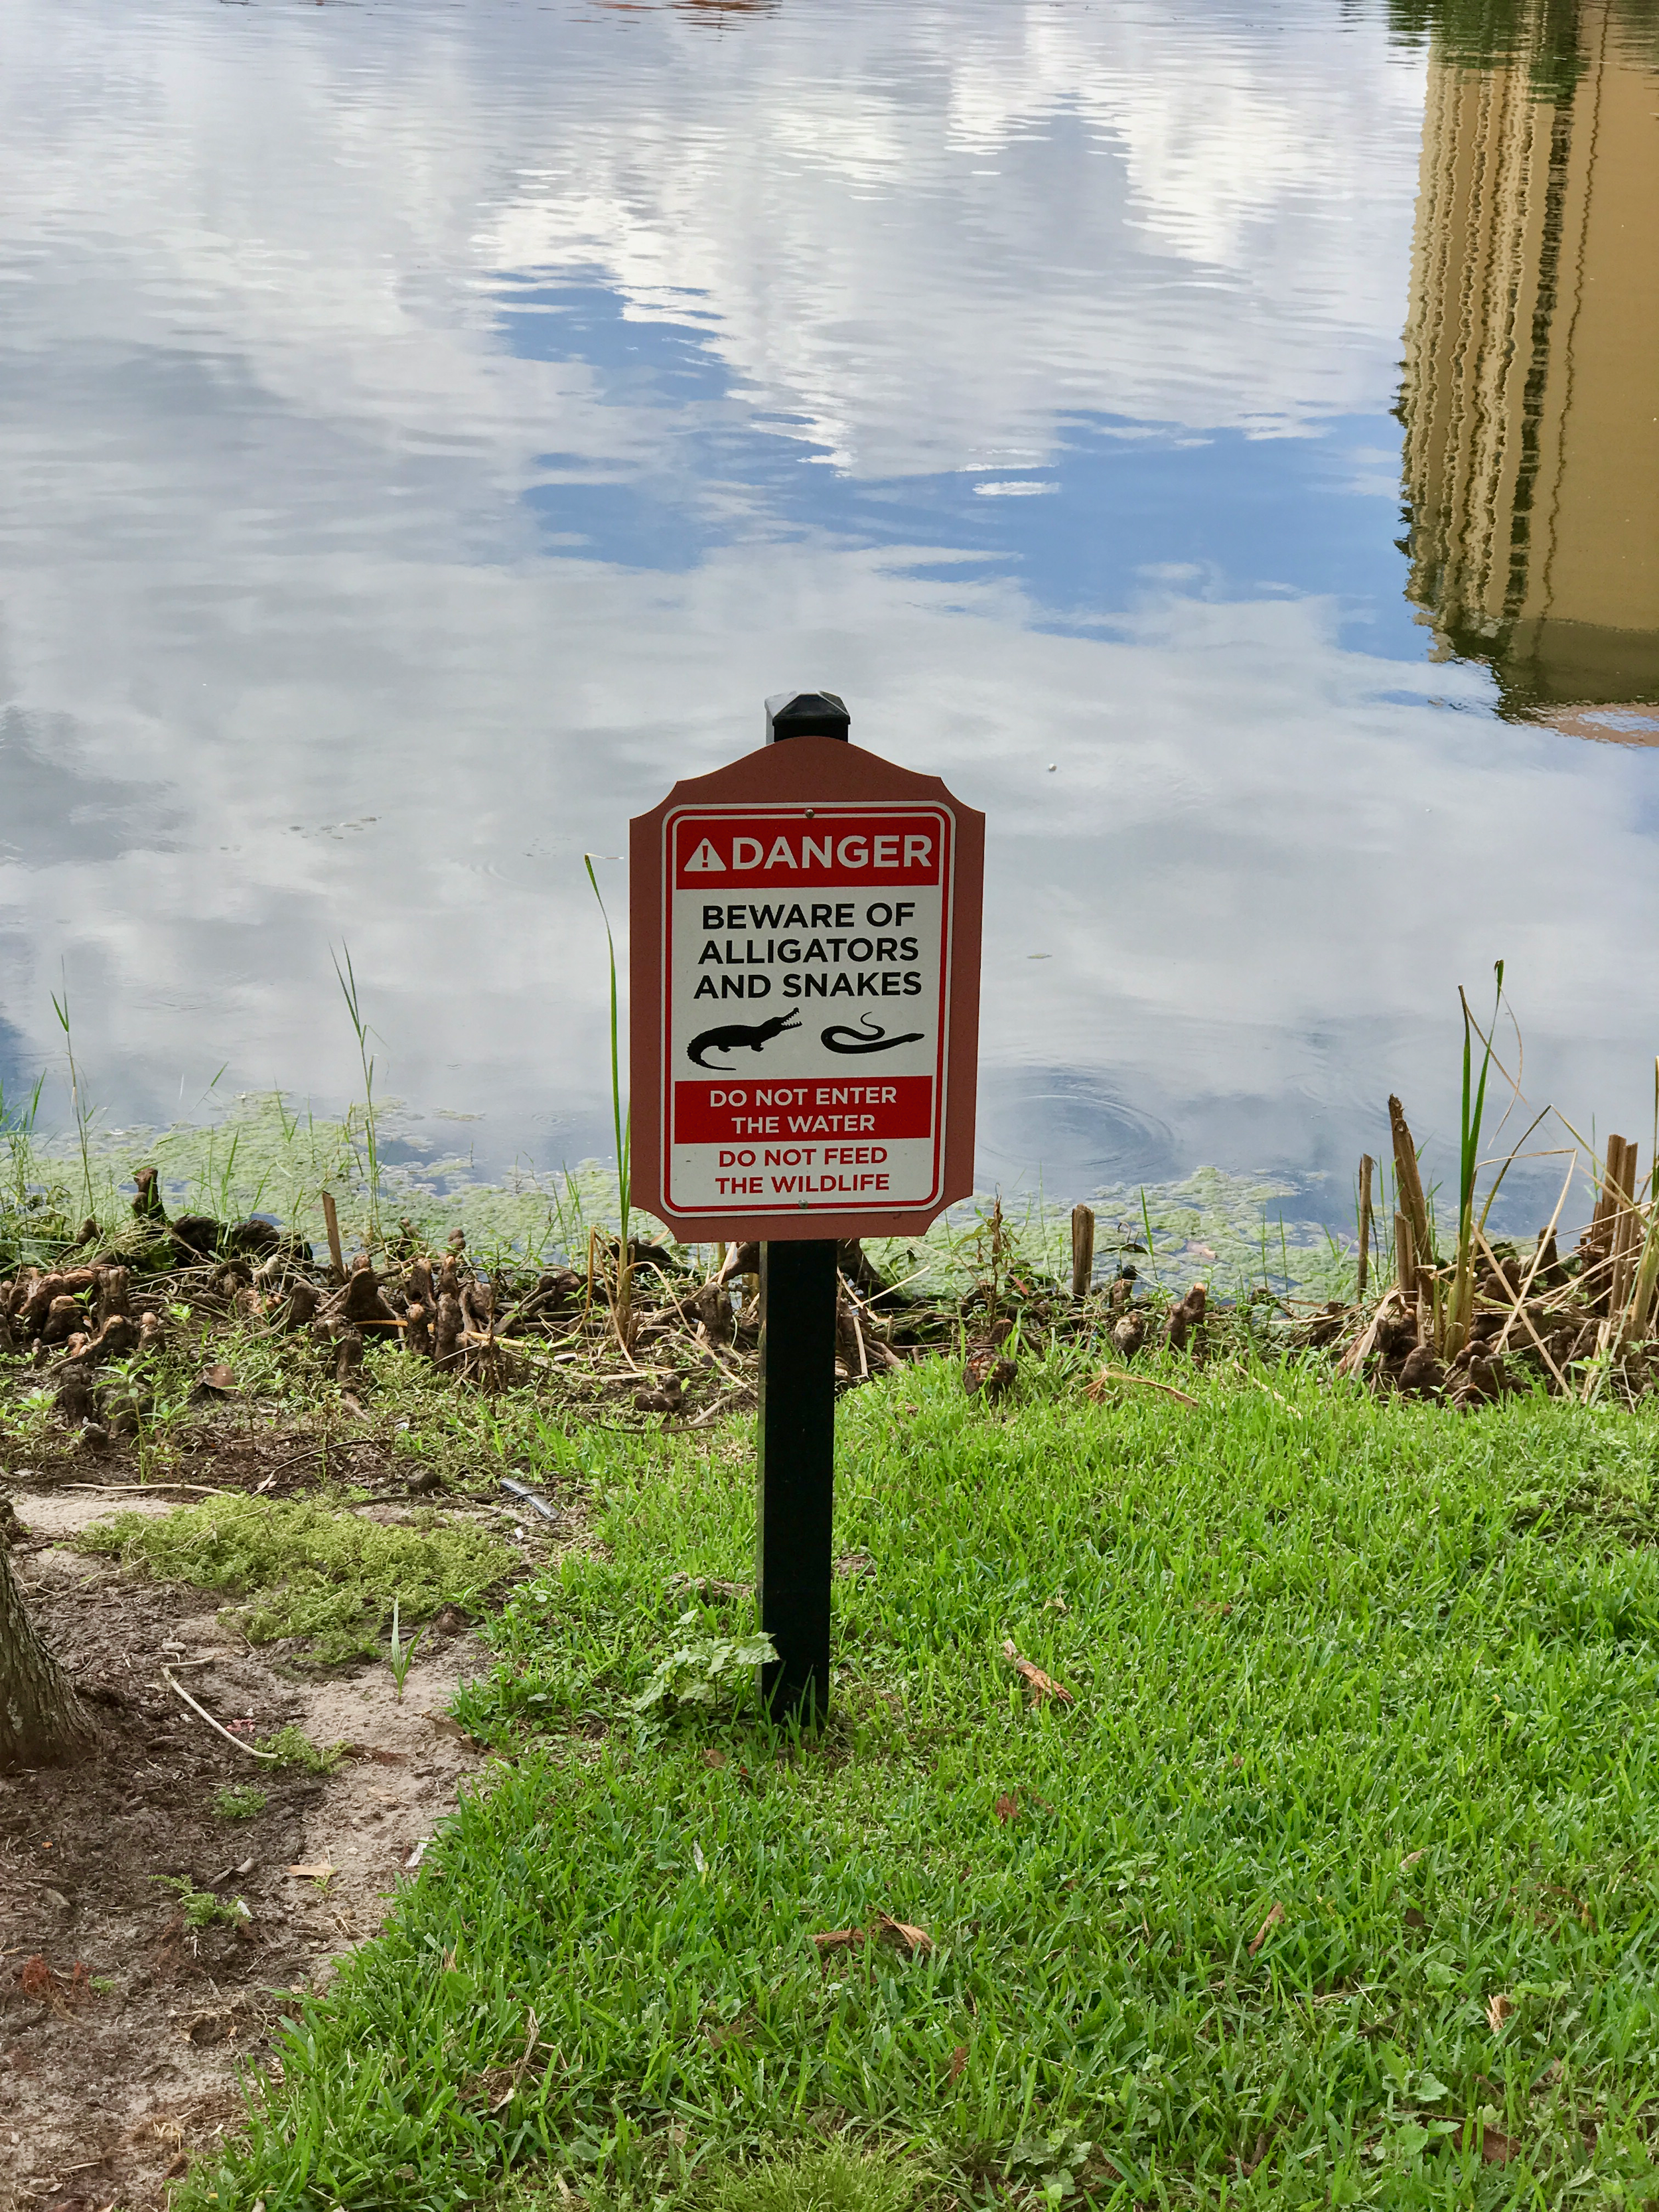 Watch out for alligators!